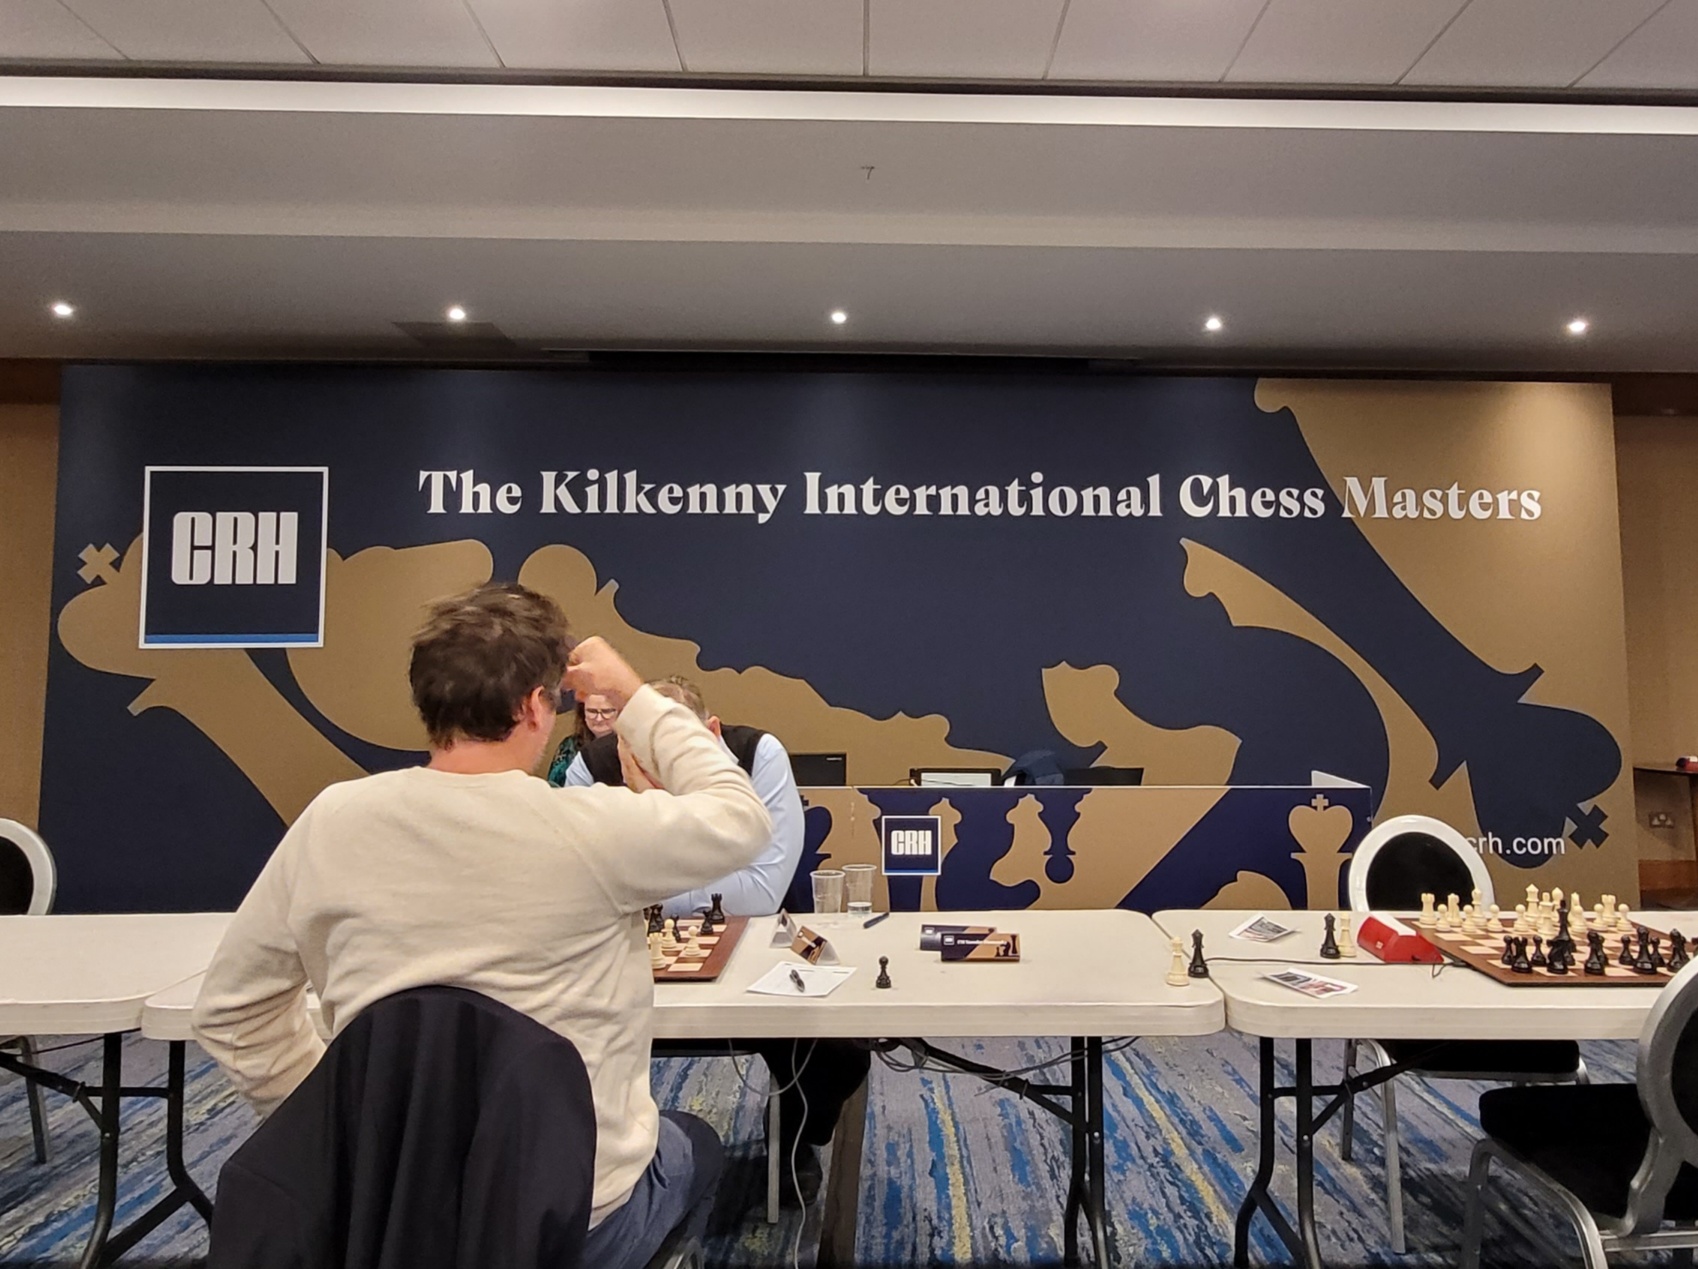 Name all 3 poeple in this image, from the 2023 Kilkenny Masters